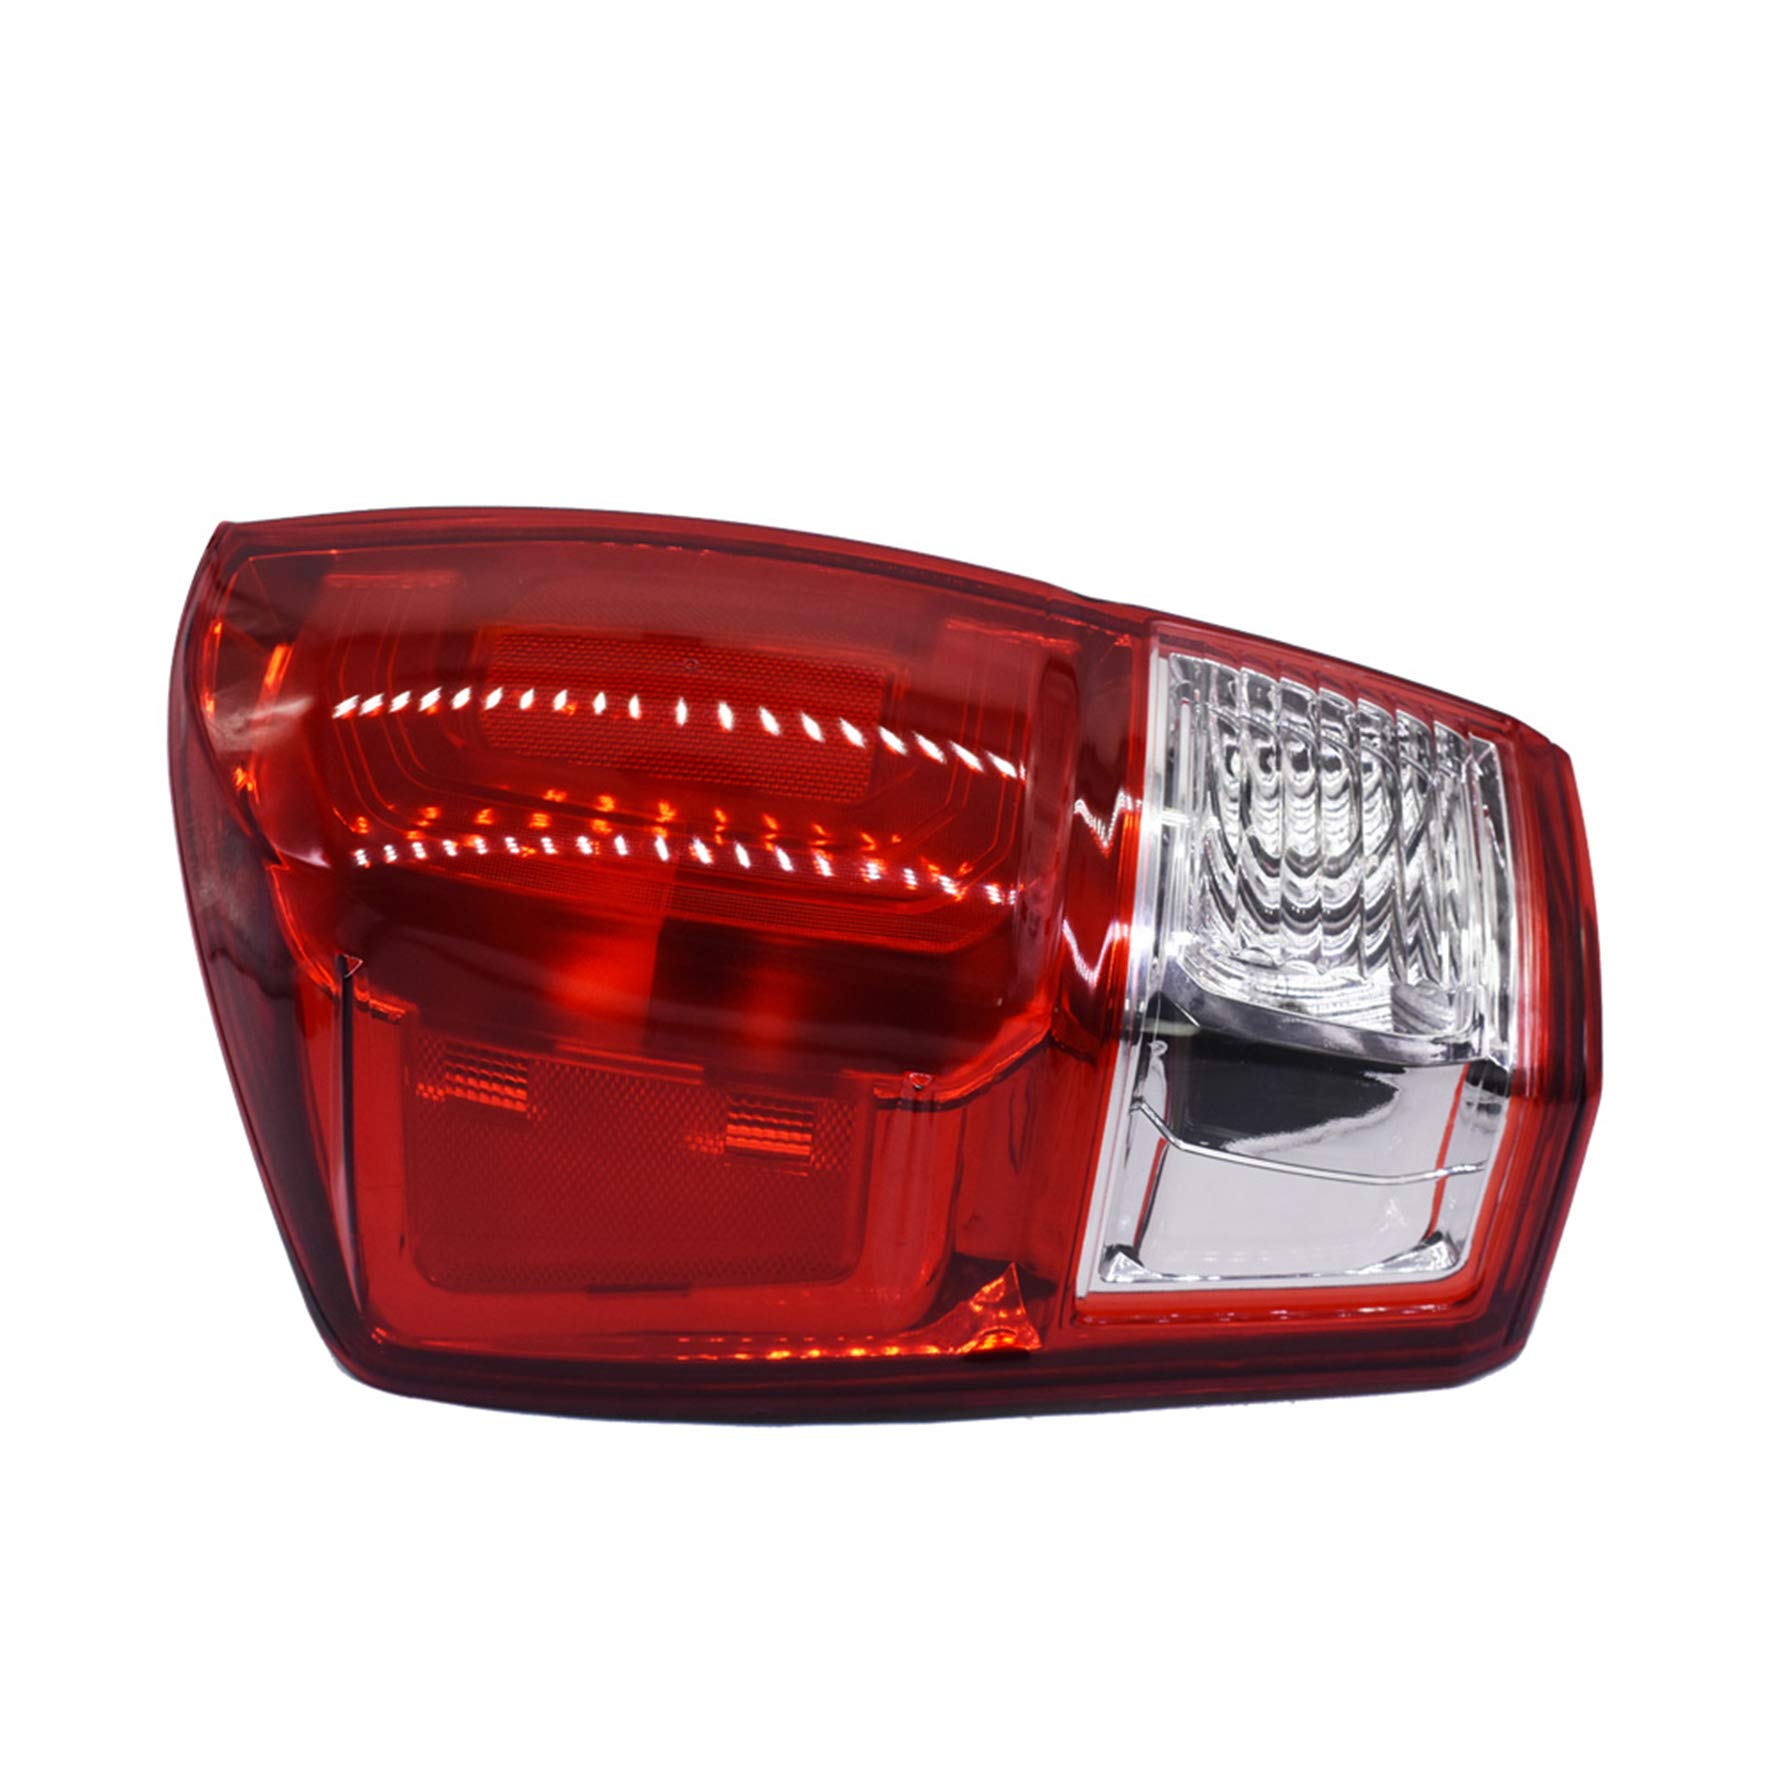 Driver Side Rear Tail Light left Brake Lamp Replacement for 2016-2017 Toyota Tacoma SR SR5 8156004170, 81560-04170